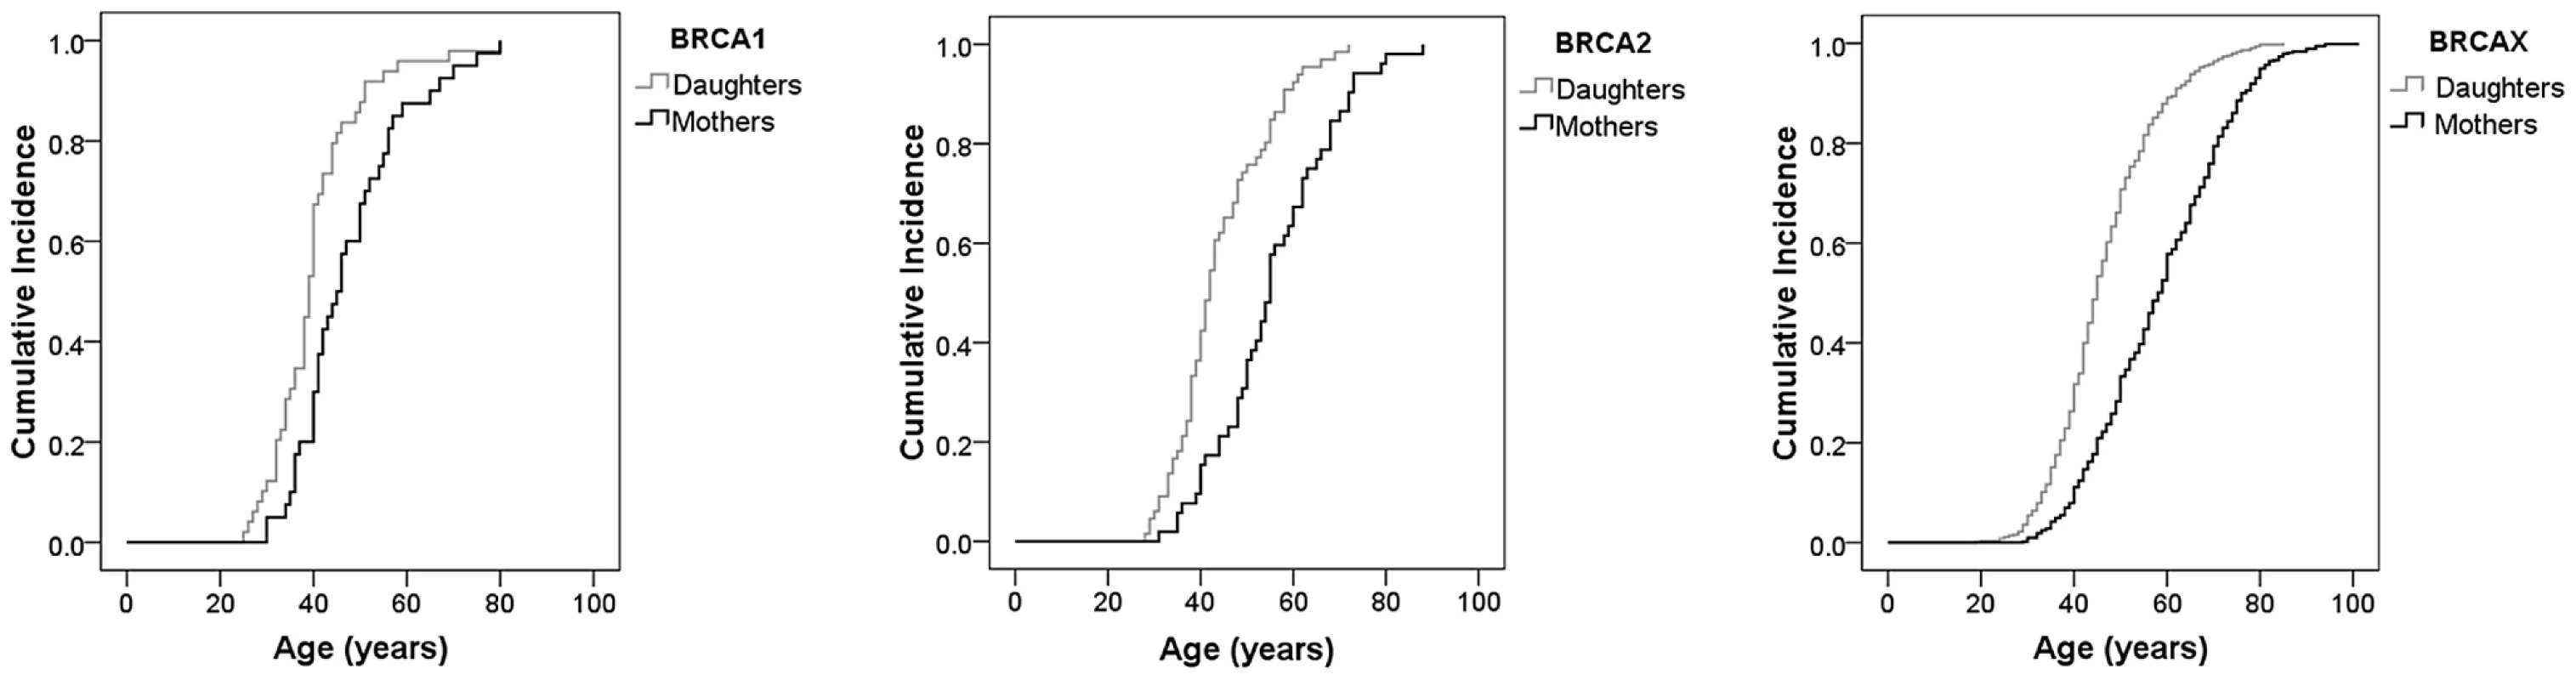 Anticipation effect in the age of breast cancer onset in the familial breast cancer genetic subgroups.